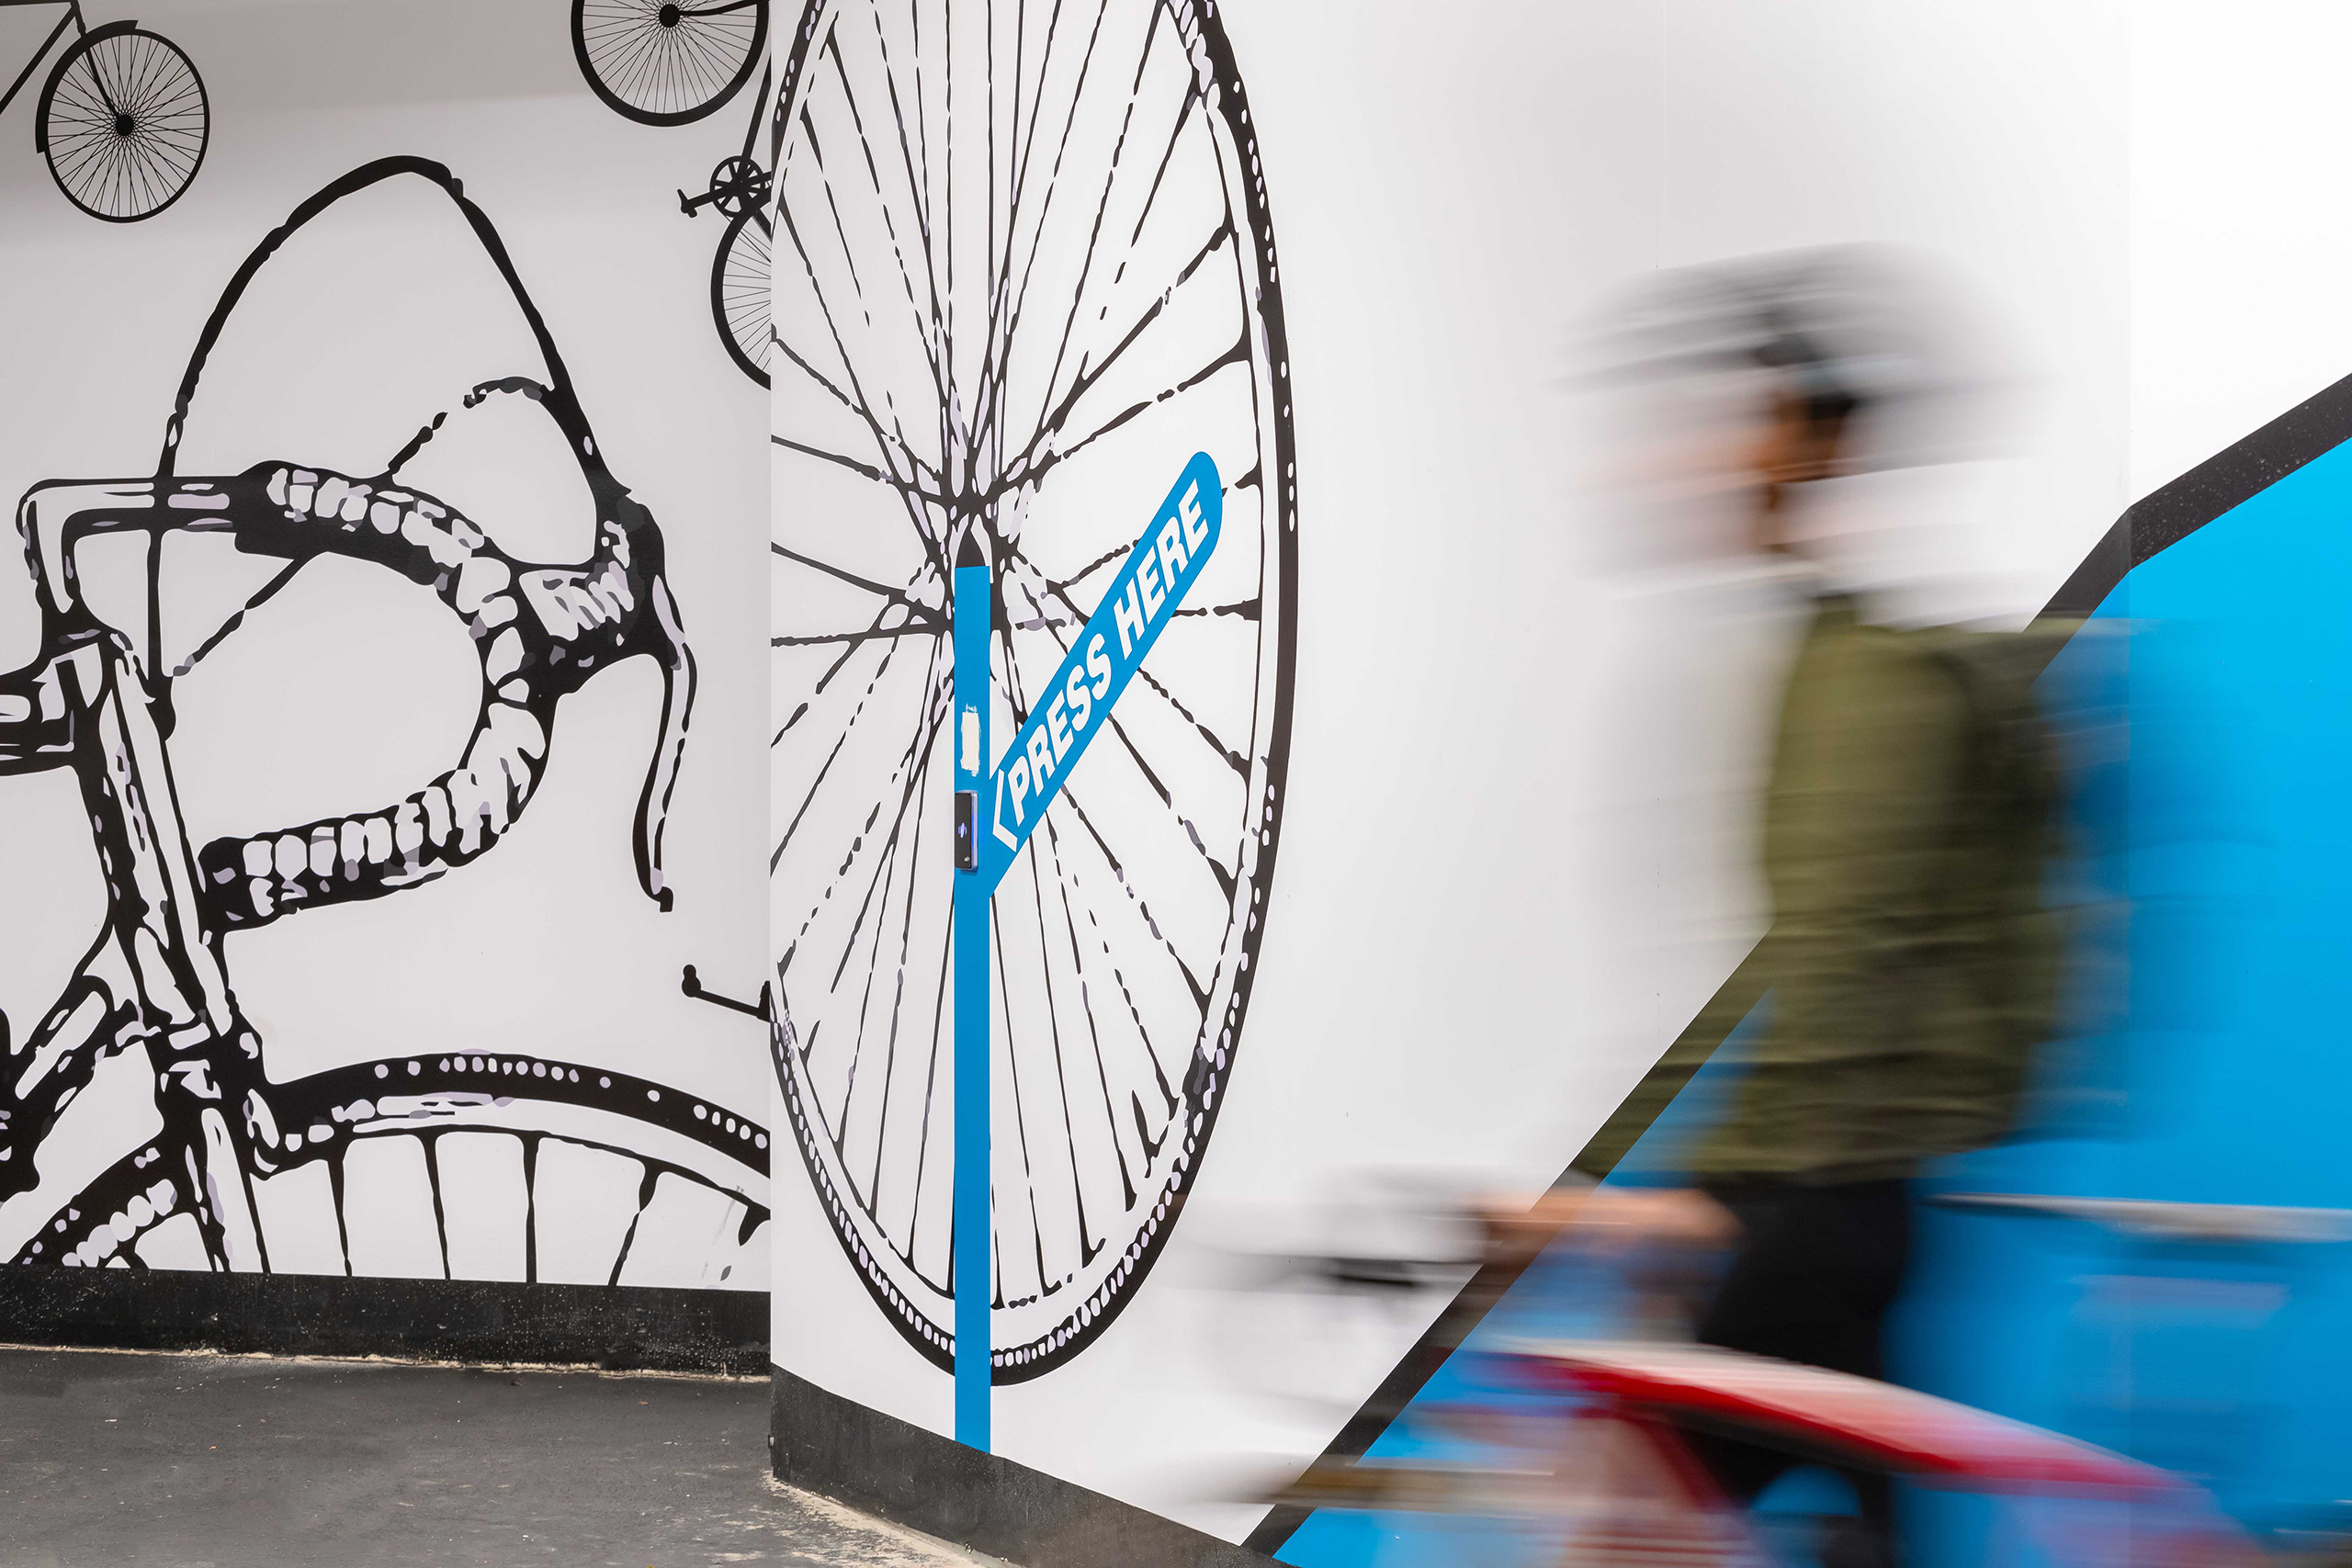 Close up of a man pushing his bike into the bicycle amenities area, adjacent to bold graphics that assist with wayfinding